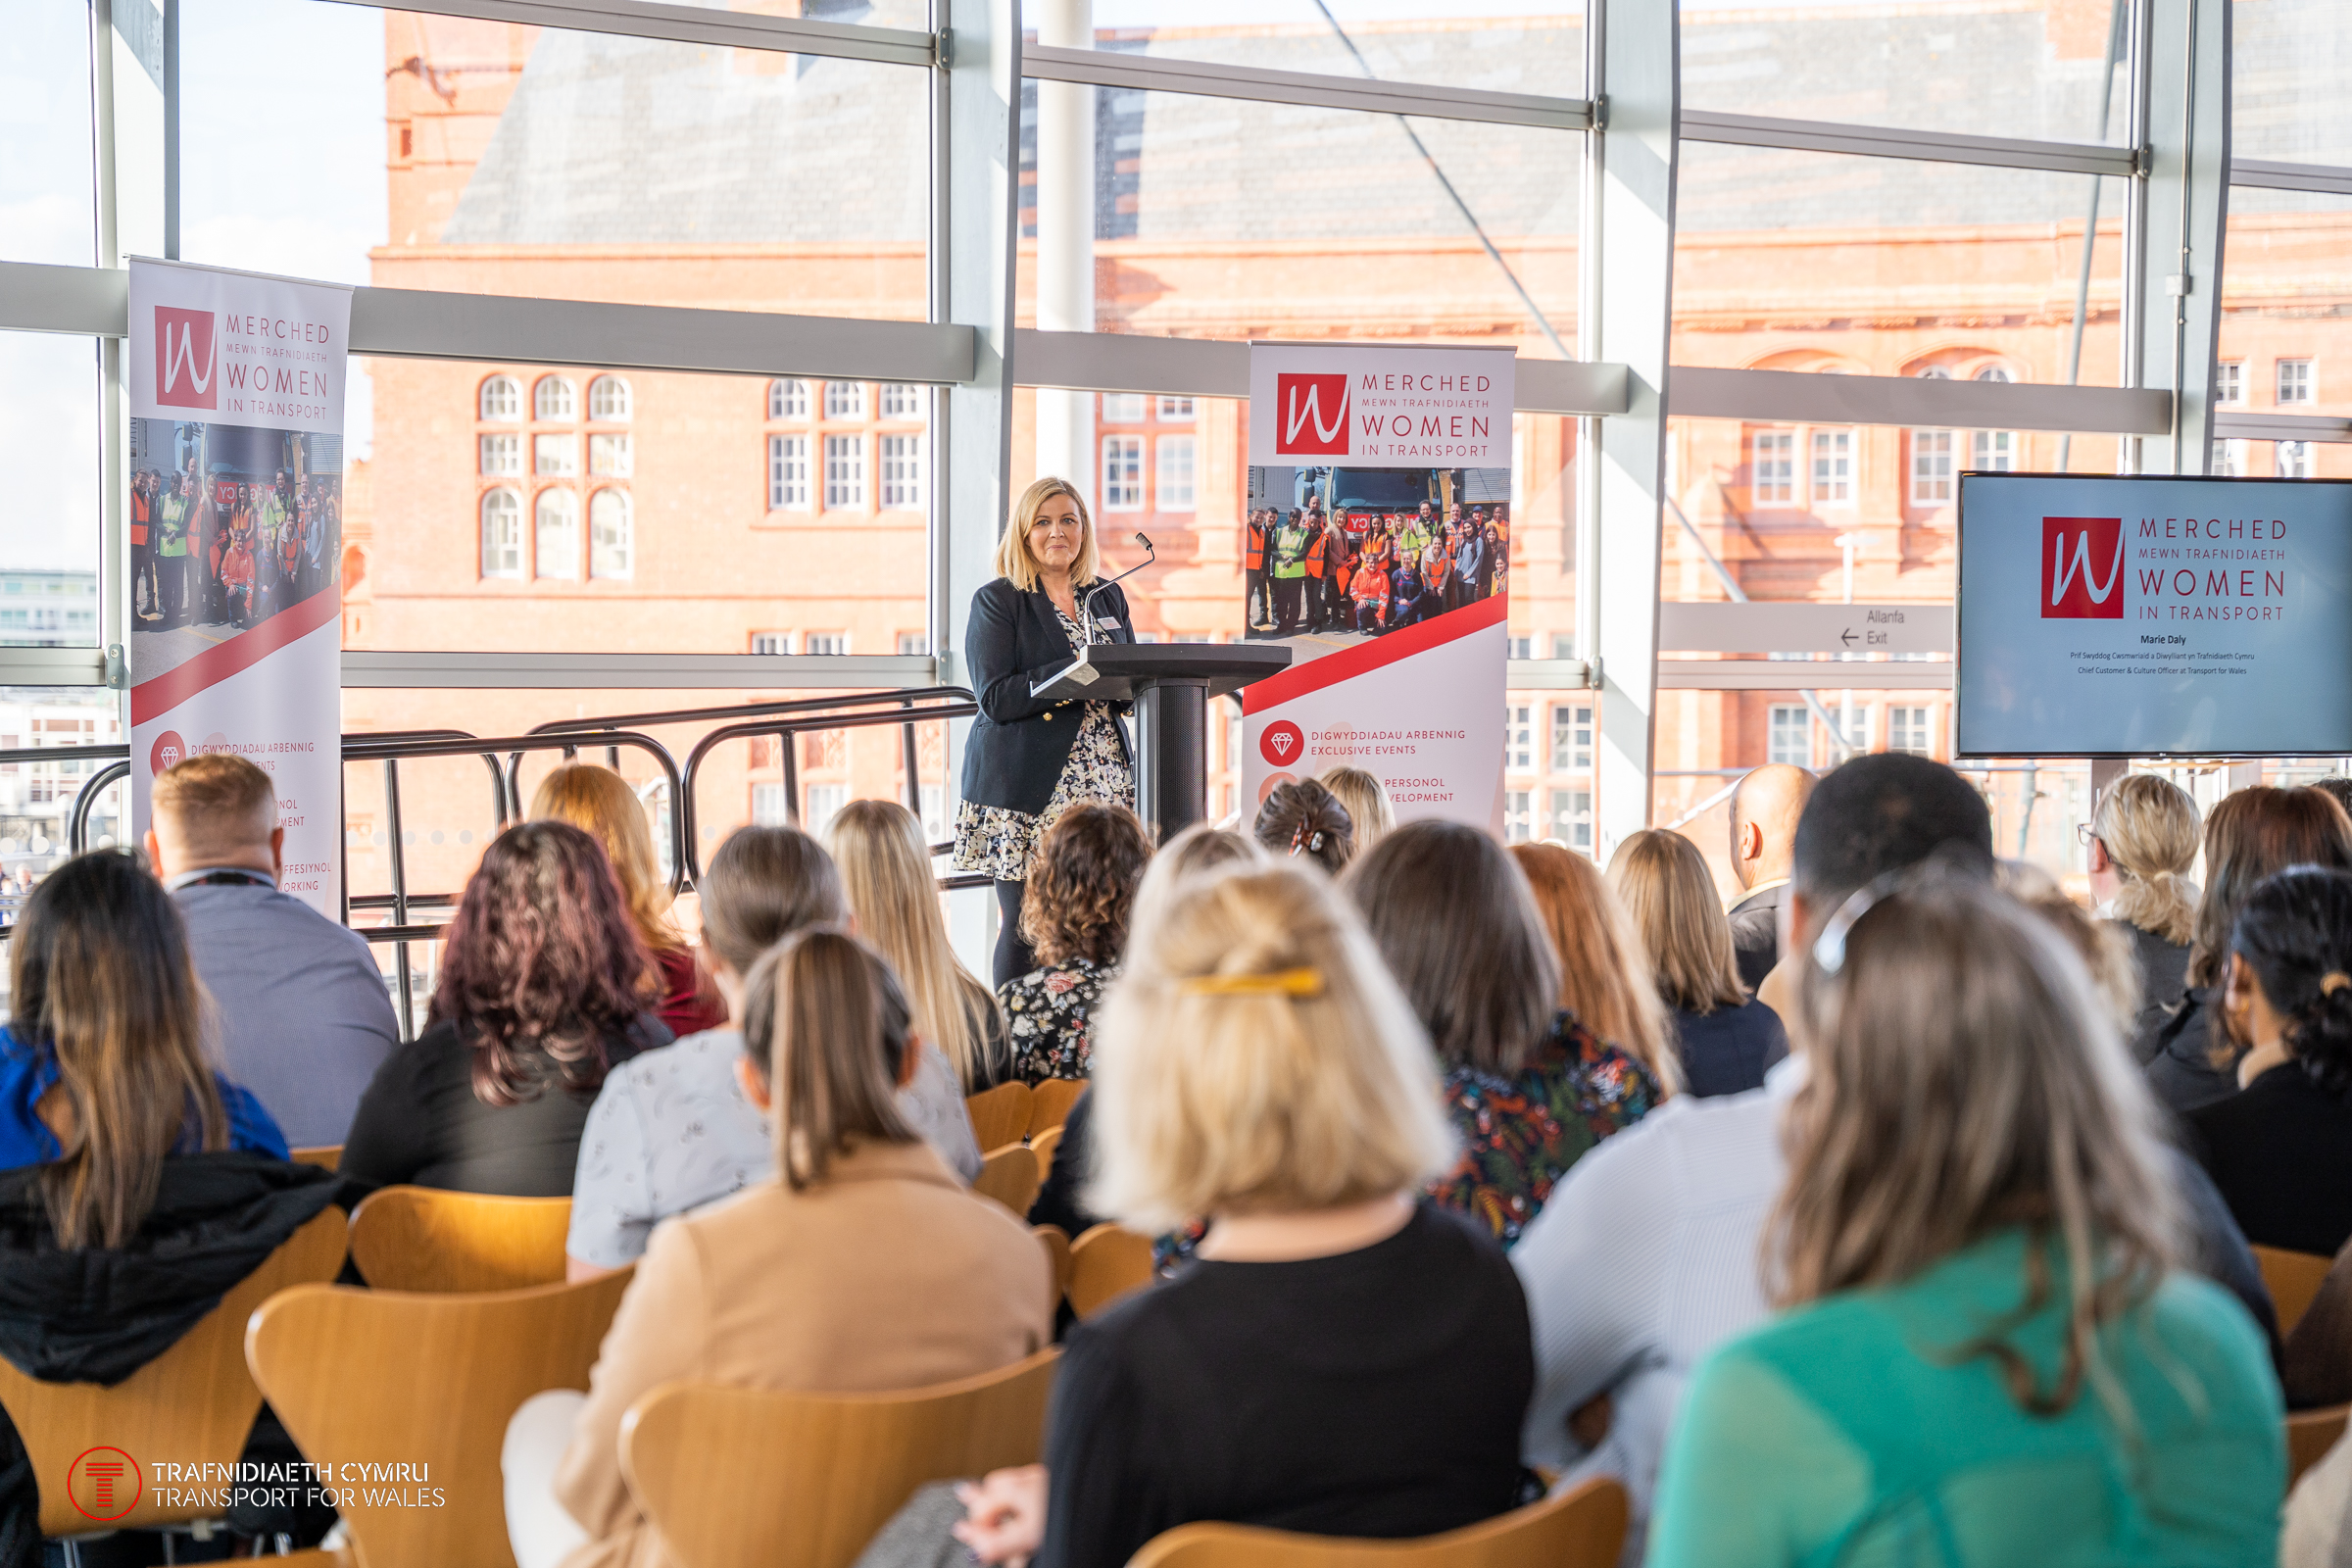 Welsh Women in Transport hub launches